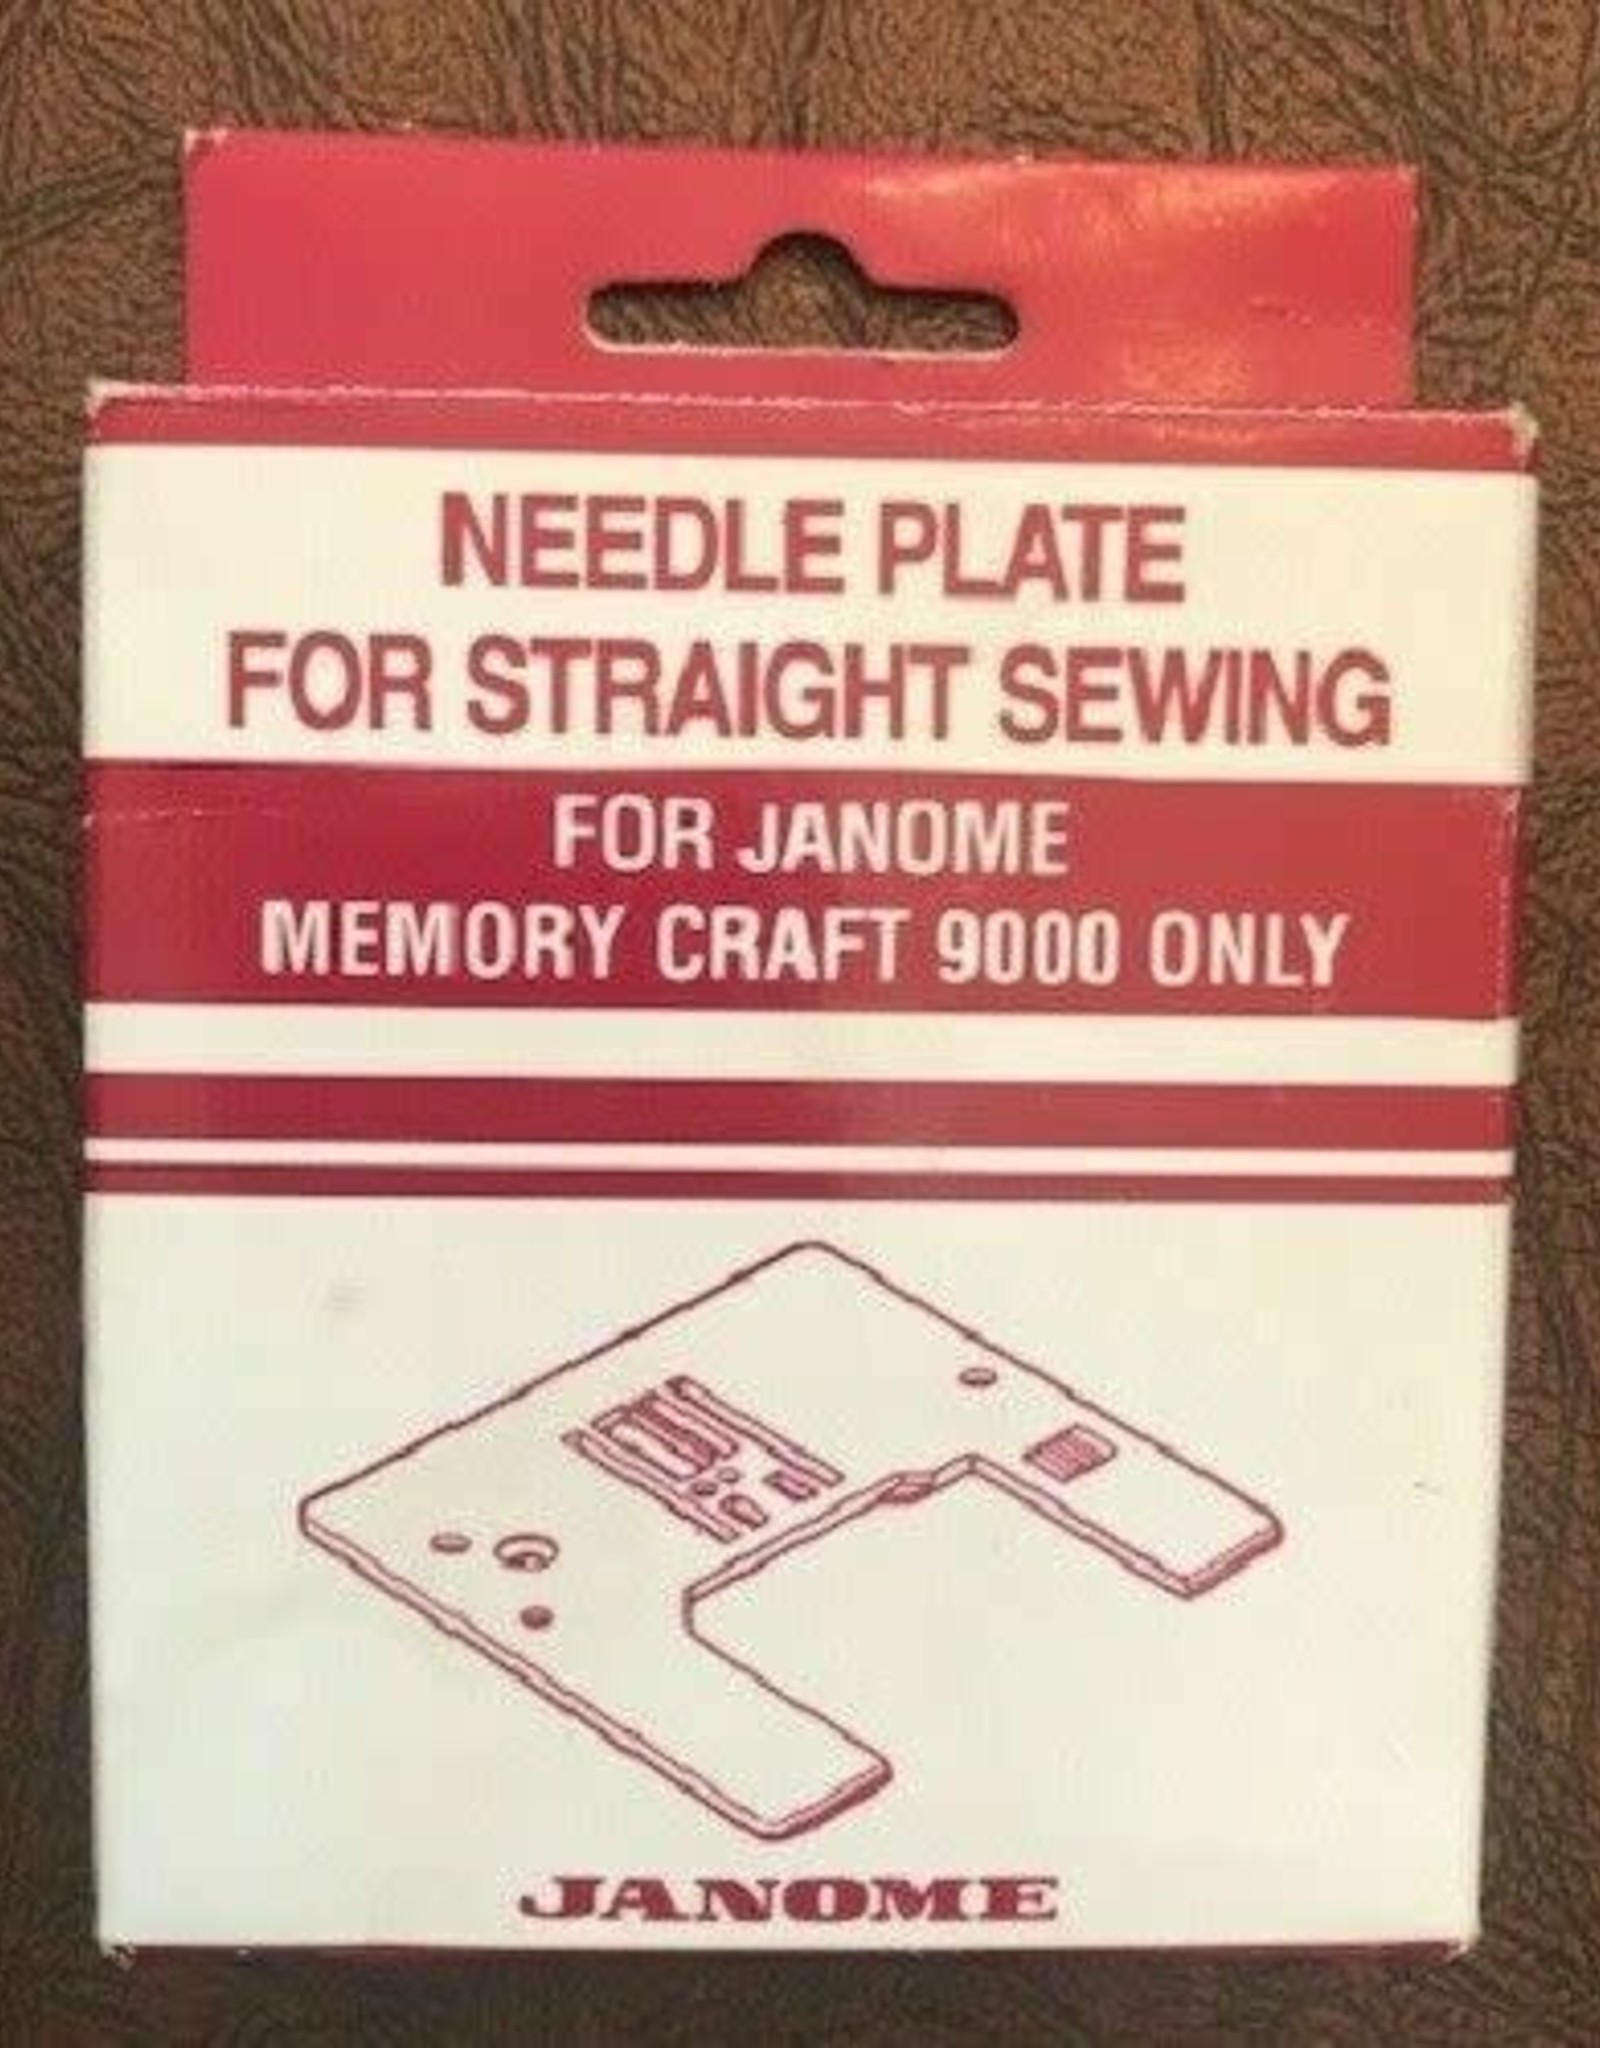 Janome Needle plate for straight sewing - Mc 9000 only